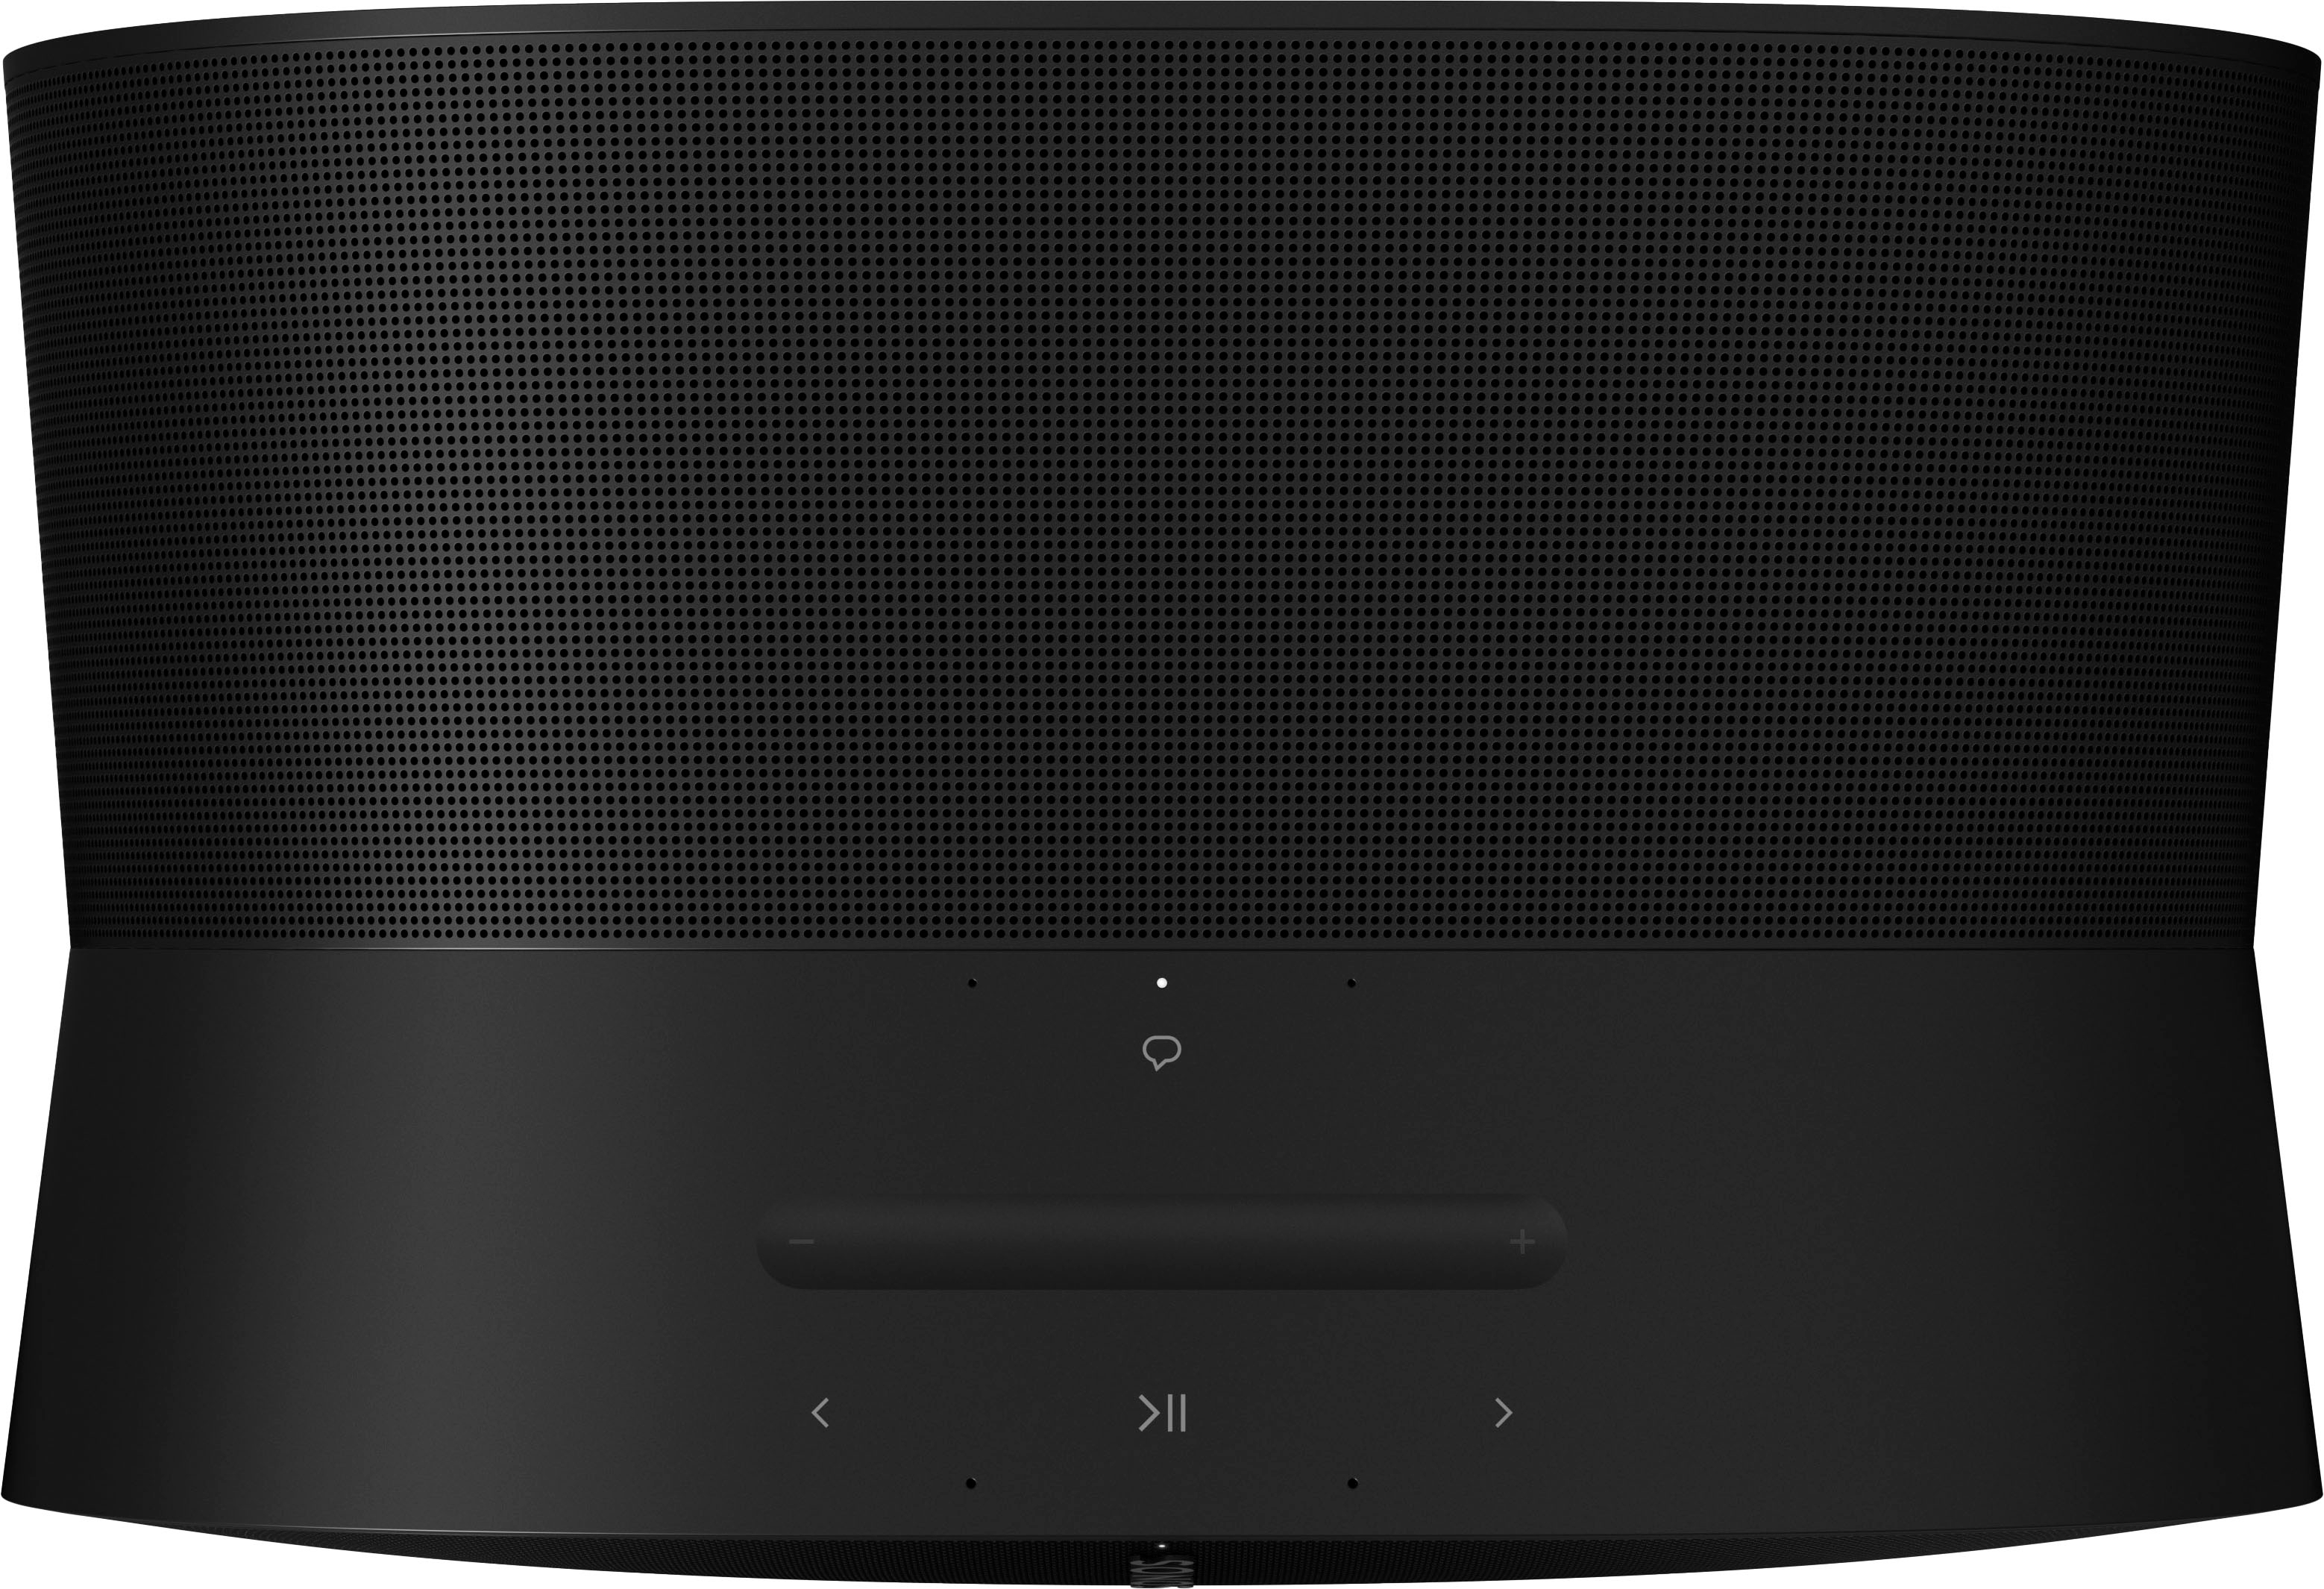 Sonos Era 300 Voice-Controlled Wireless Smart Speaker with Bluetooth,  Trueplay Acoustic Tuning Technology, & Voice Control Built-In (Black) 